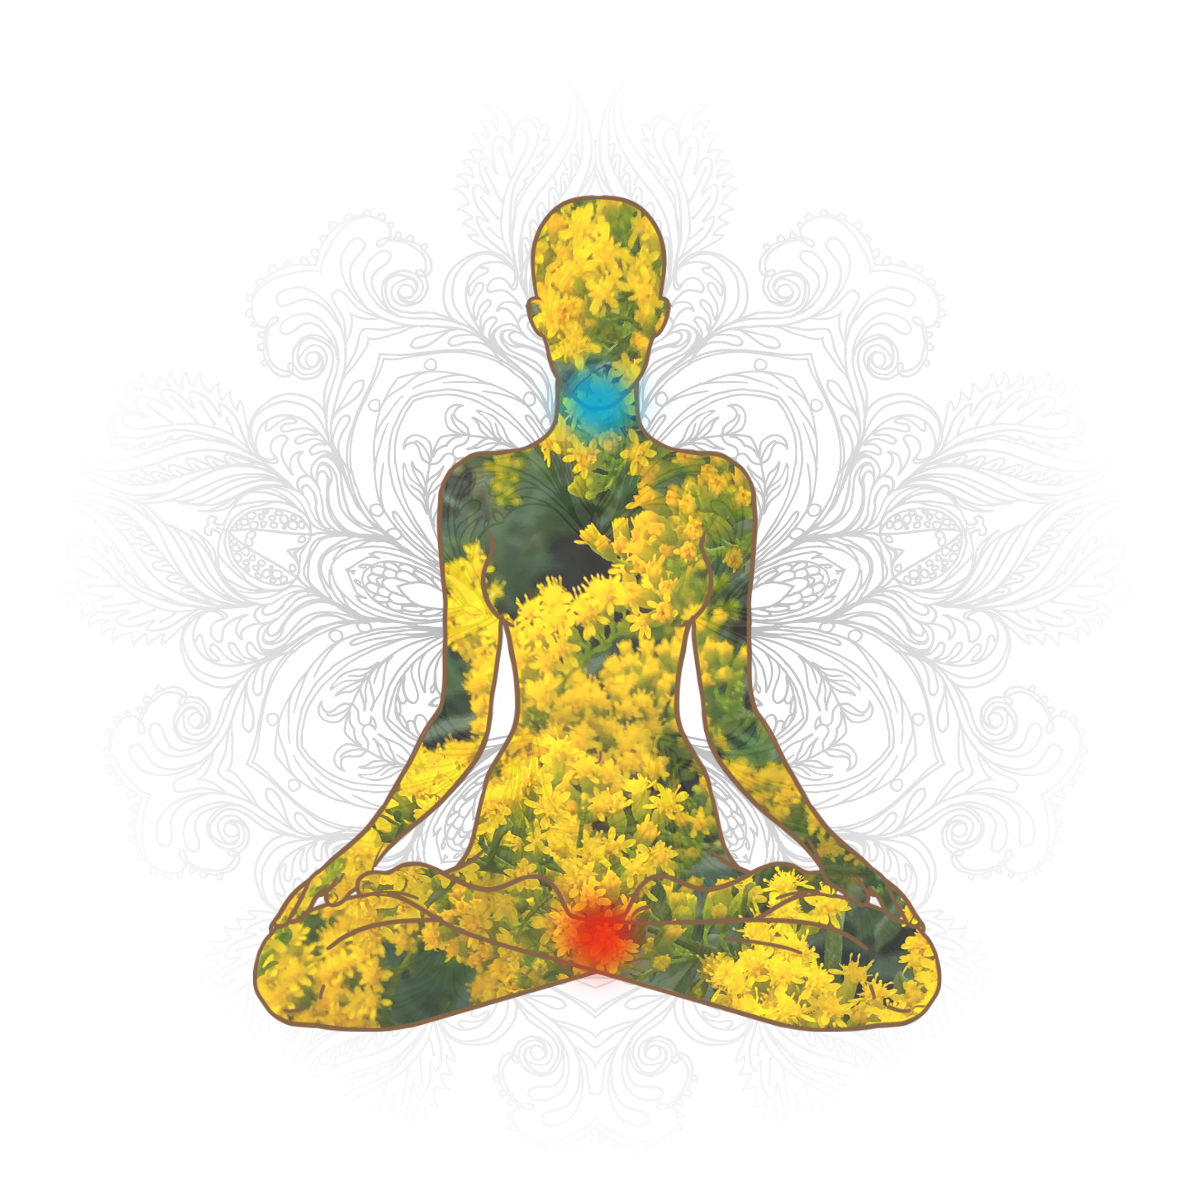 Goldenrod chakras image displaying the first and fifth chakras being activated